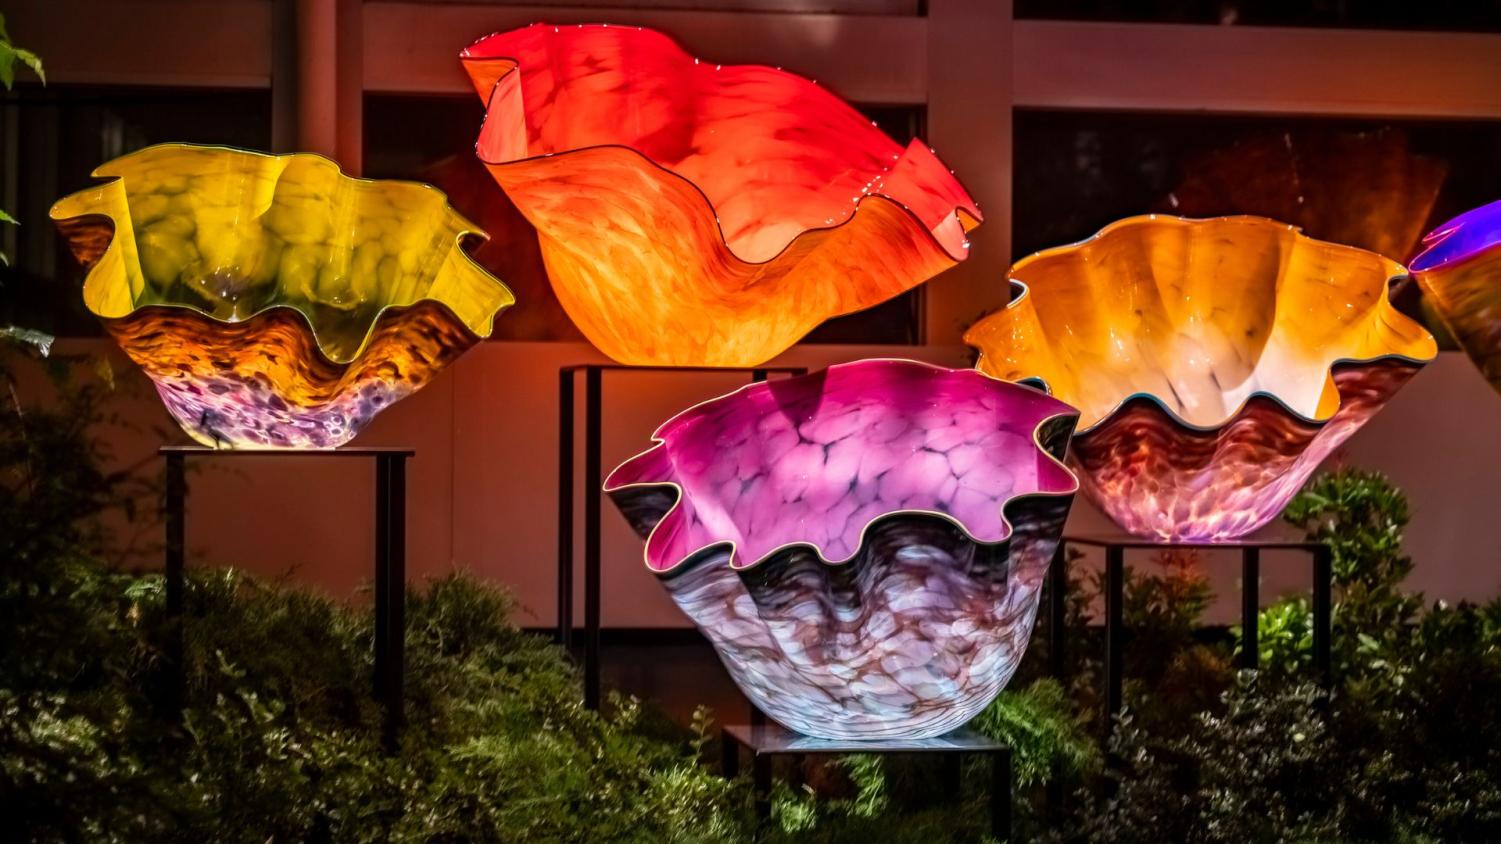 Two ways to see Dale Chihuly artwork and how living on a kibbutz ...